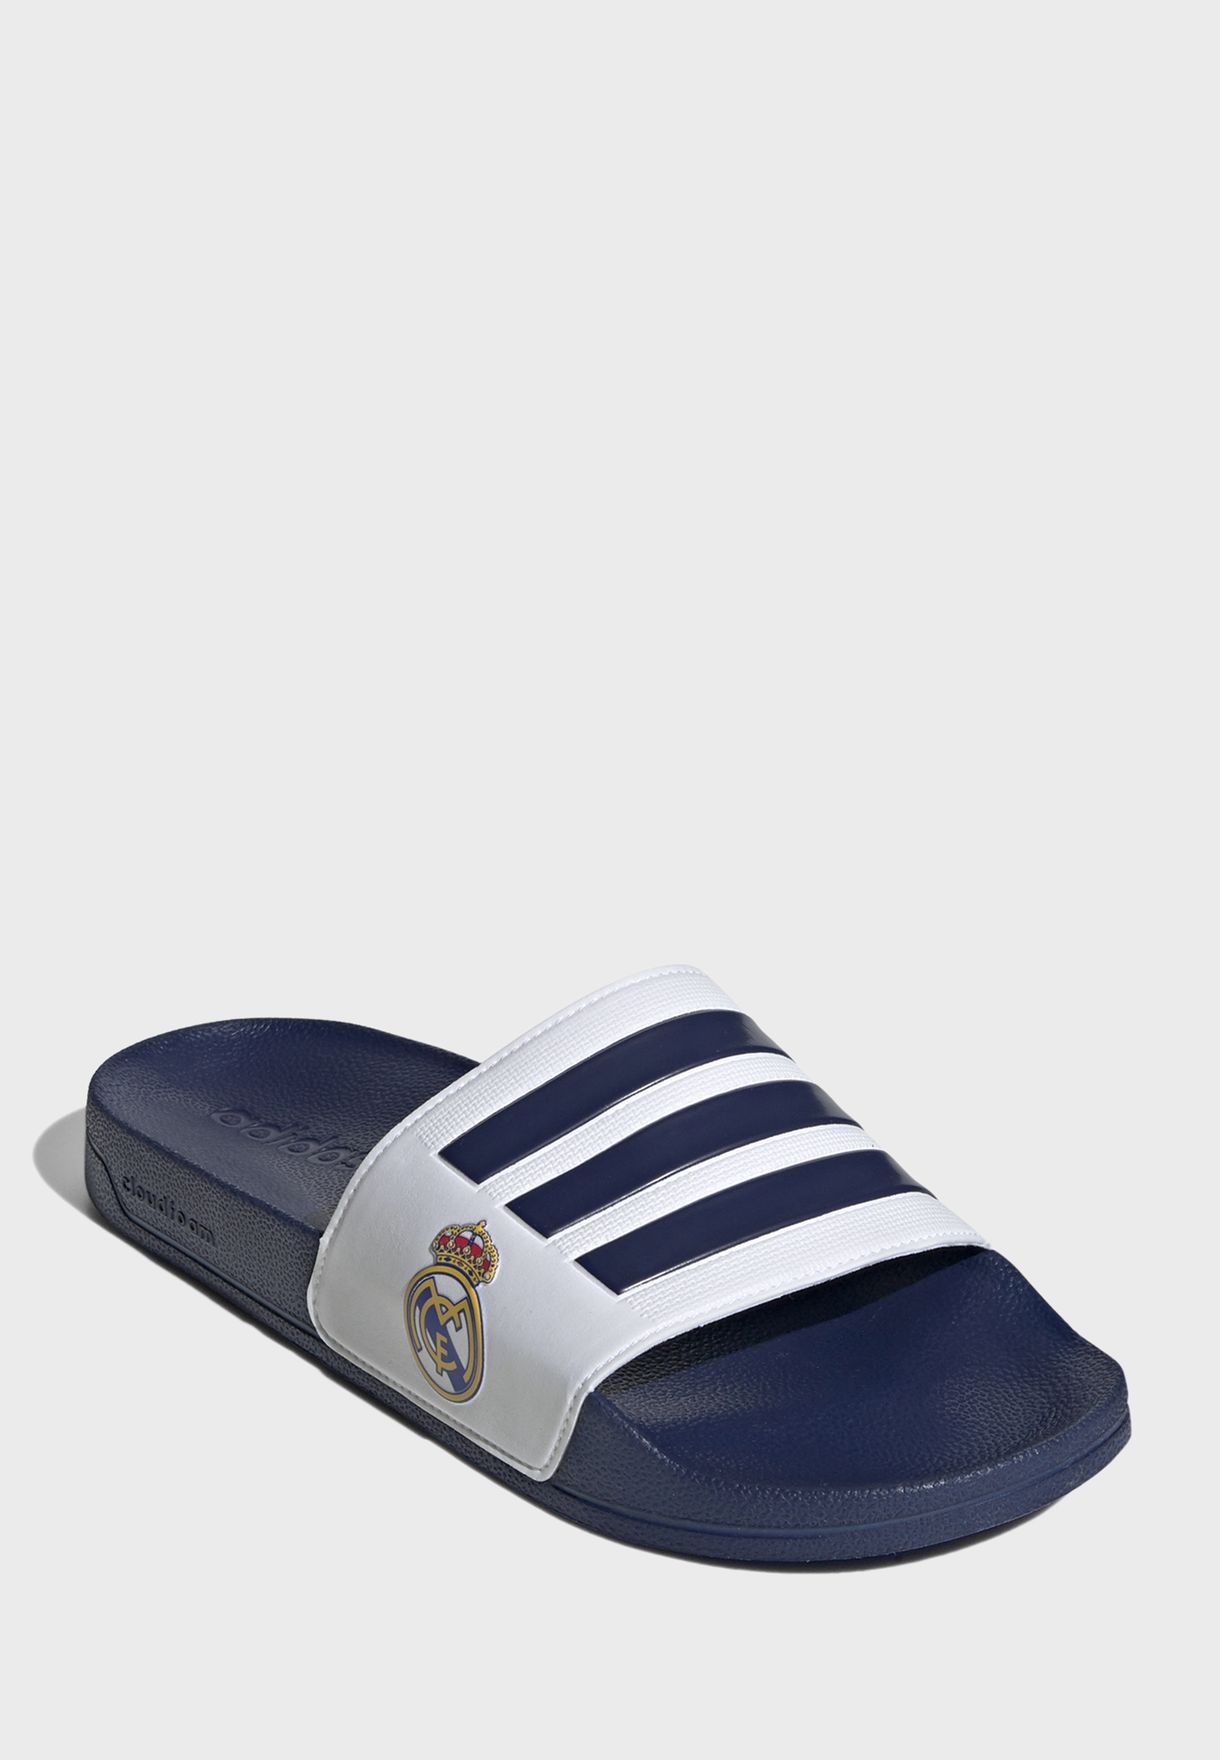 real madrid slippers